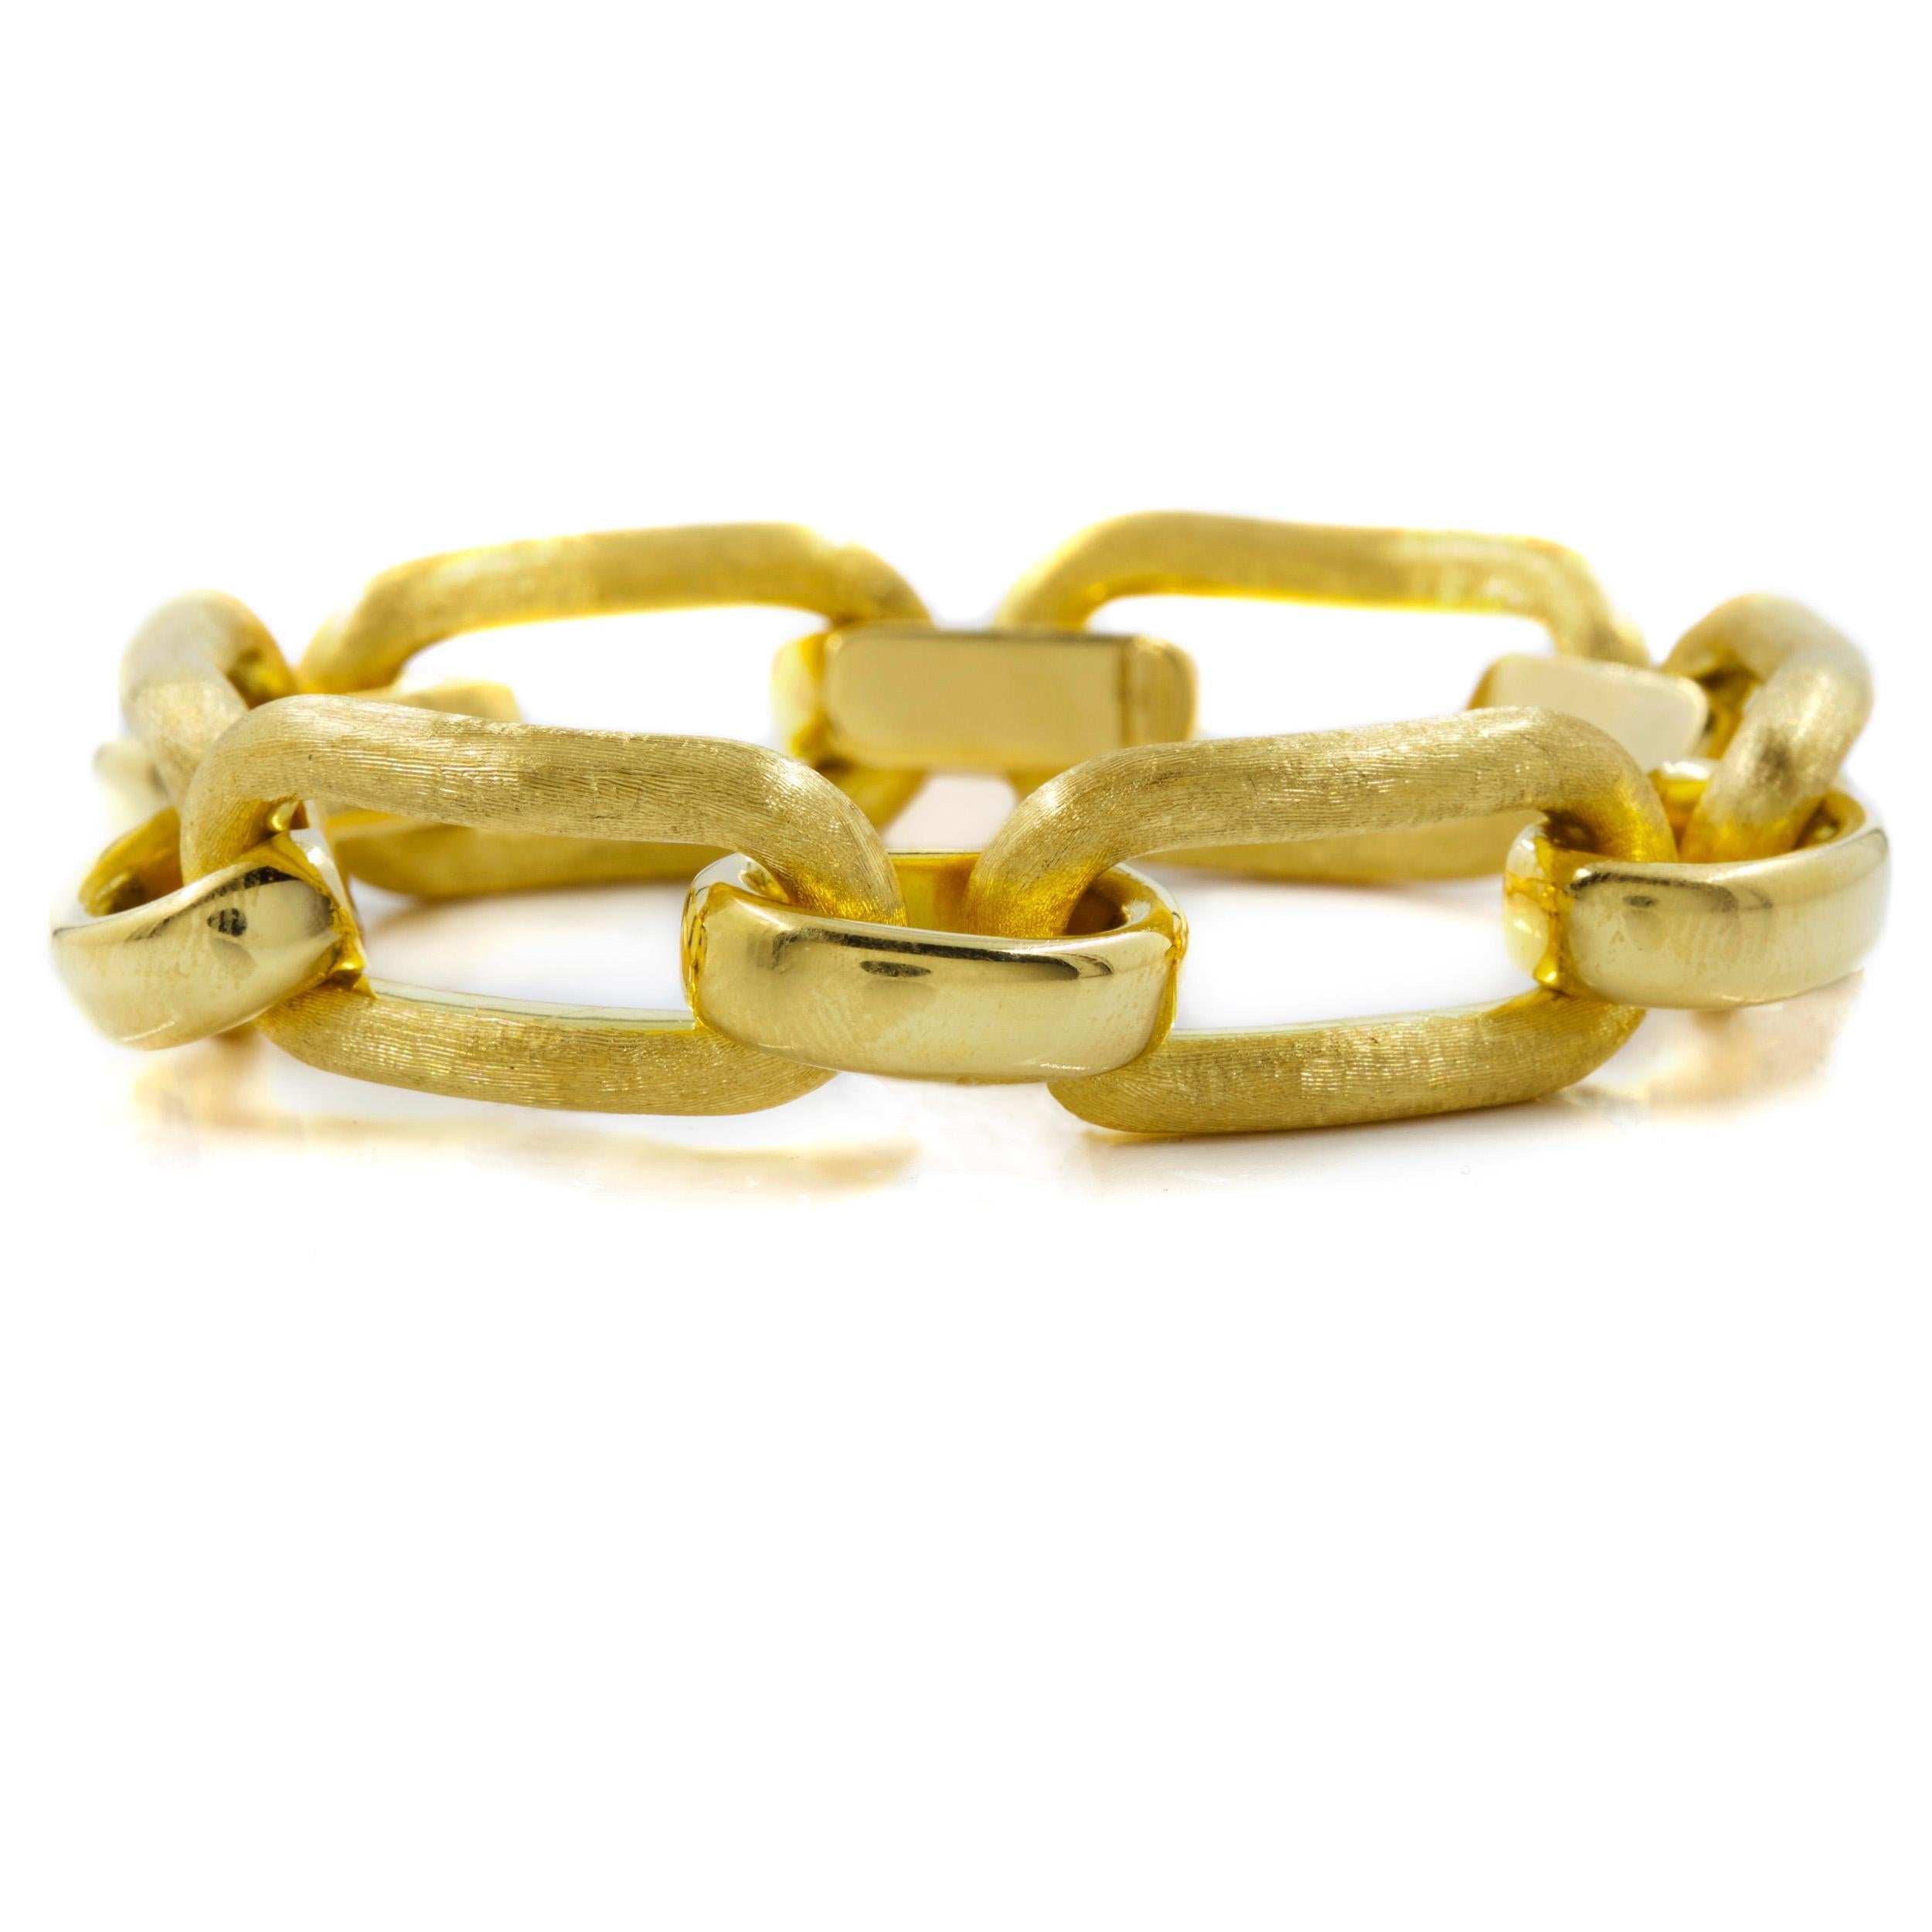 A fine open-link bracelet manufactured by H. Gold Jewelry, it features a delicate florentine finish to the longer links and a brilliant high-polish to the partial oval interlinks. The clasp is beautifully conceived and nearly invisibly joins the